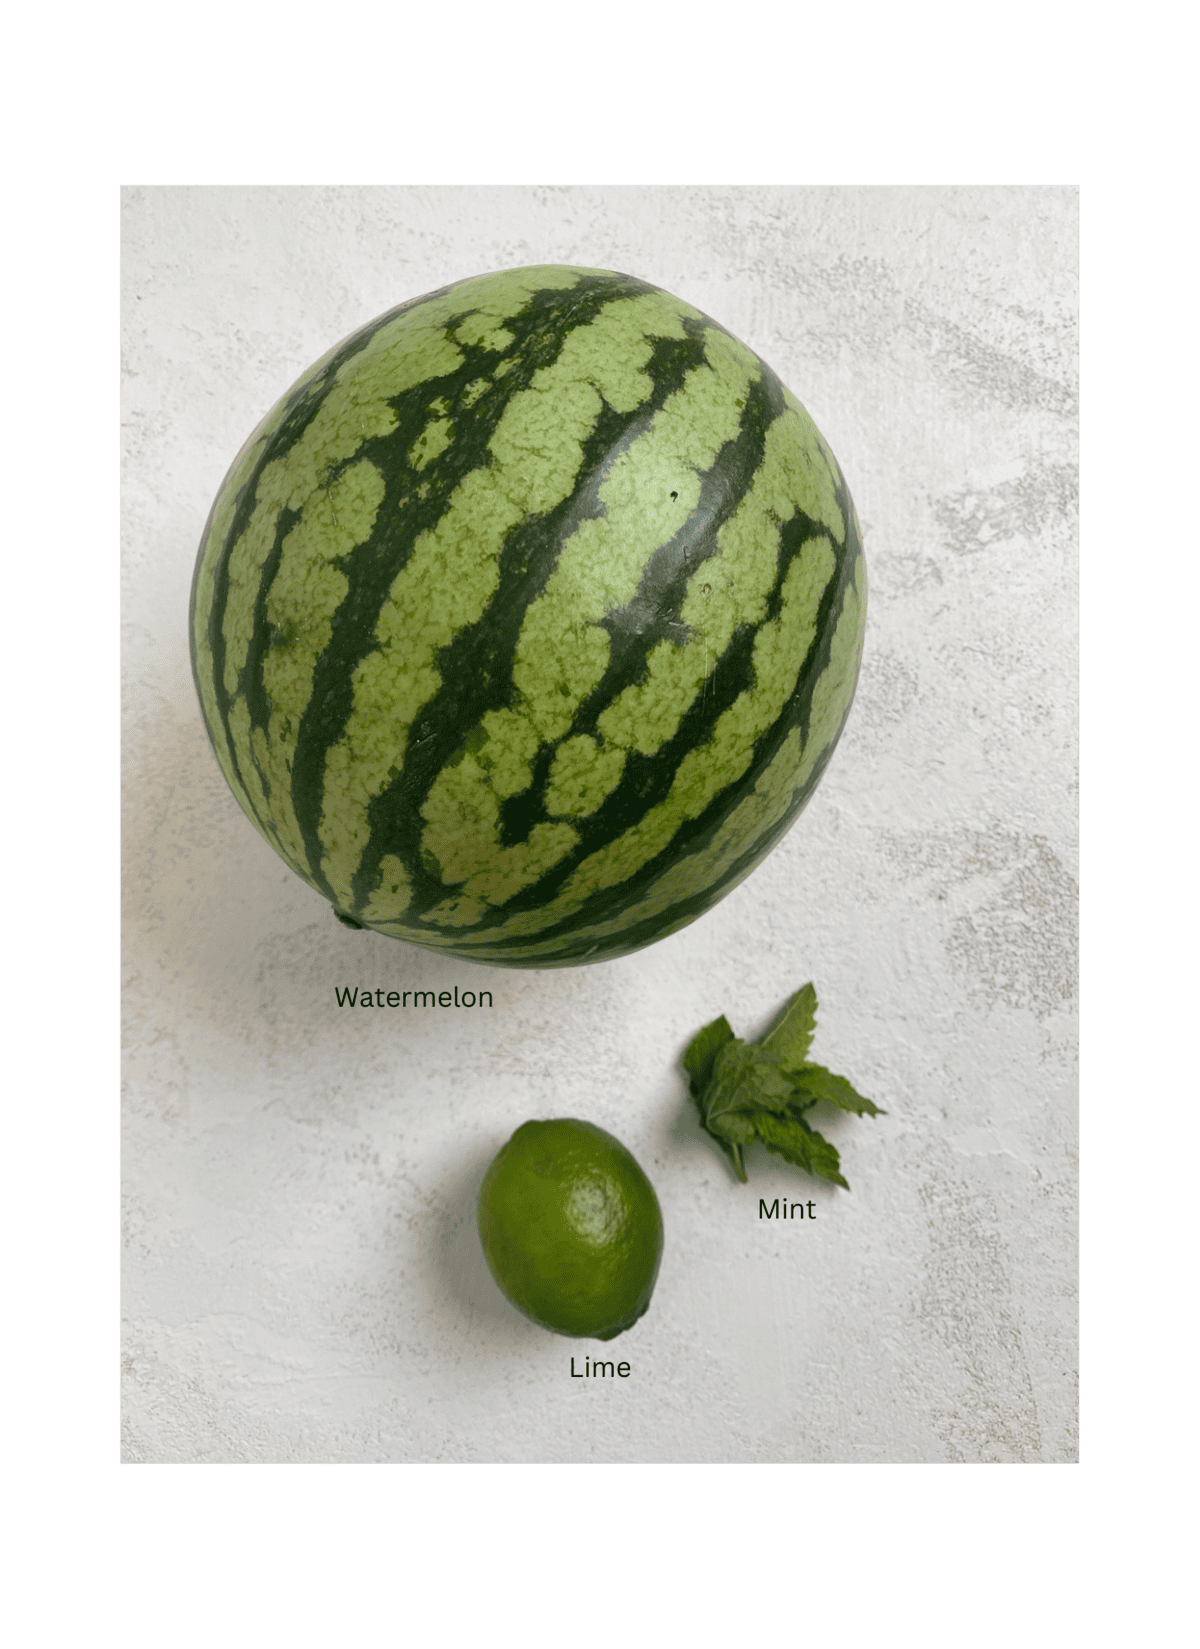 ingredients of watermelon, lime and mint on a white surface